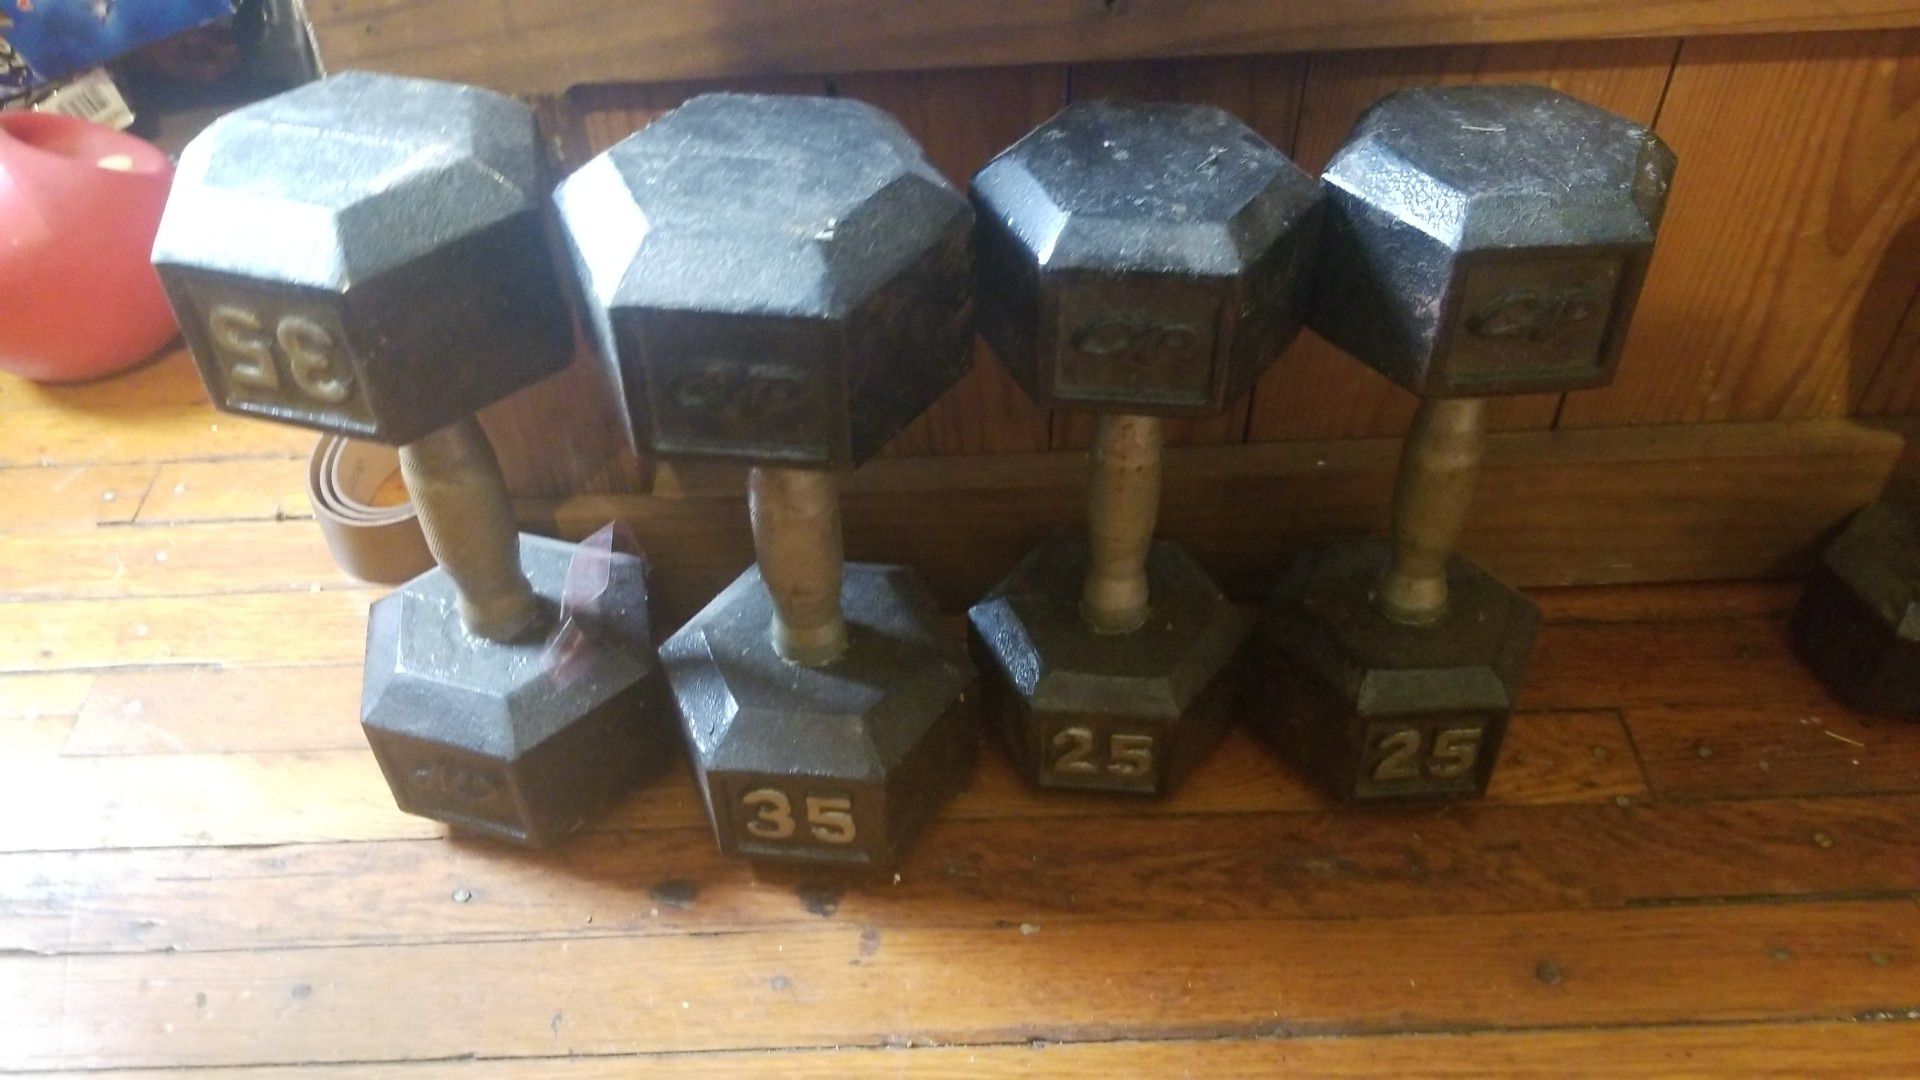 Two pair of dumbbells 25-35 pounds